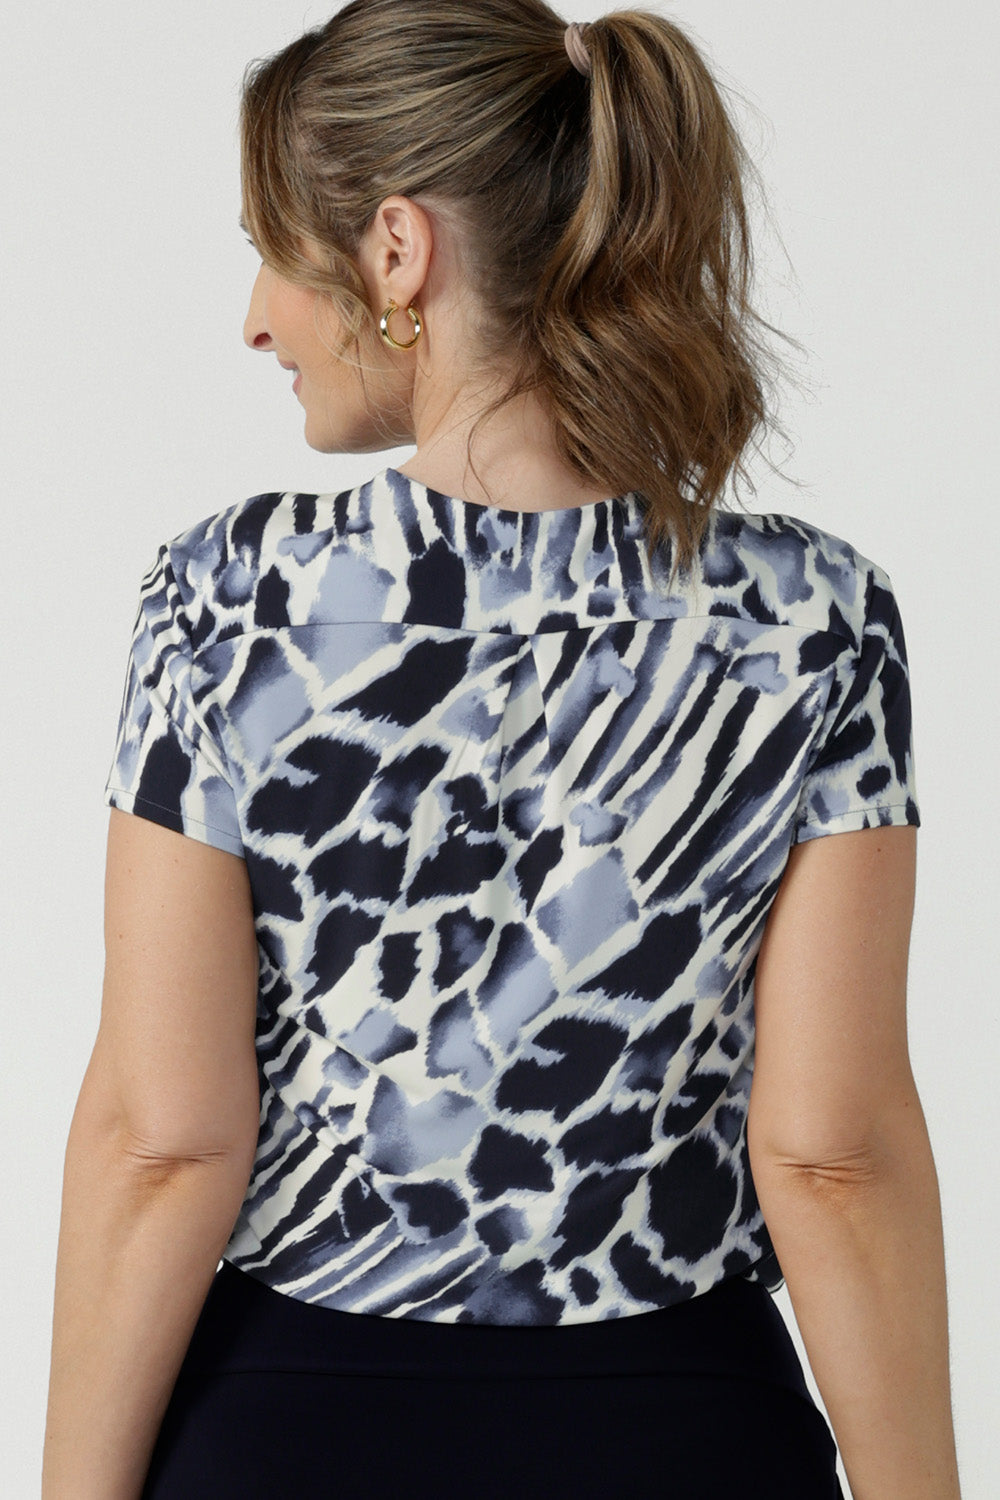 Back view of a good top for curvy women, this short sleeve V-neck top is tailored to fit women's curves. Shown on a size 10, 40 plus woman, this blue and white print jersey top is Australian-made. Wear this top for work and casual wear. Shop online in inclusive sizes 8 to 24 at Australian women's fashion online store,, Leina & Fleur.